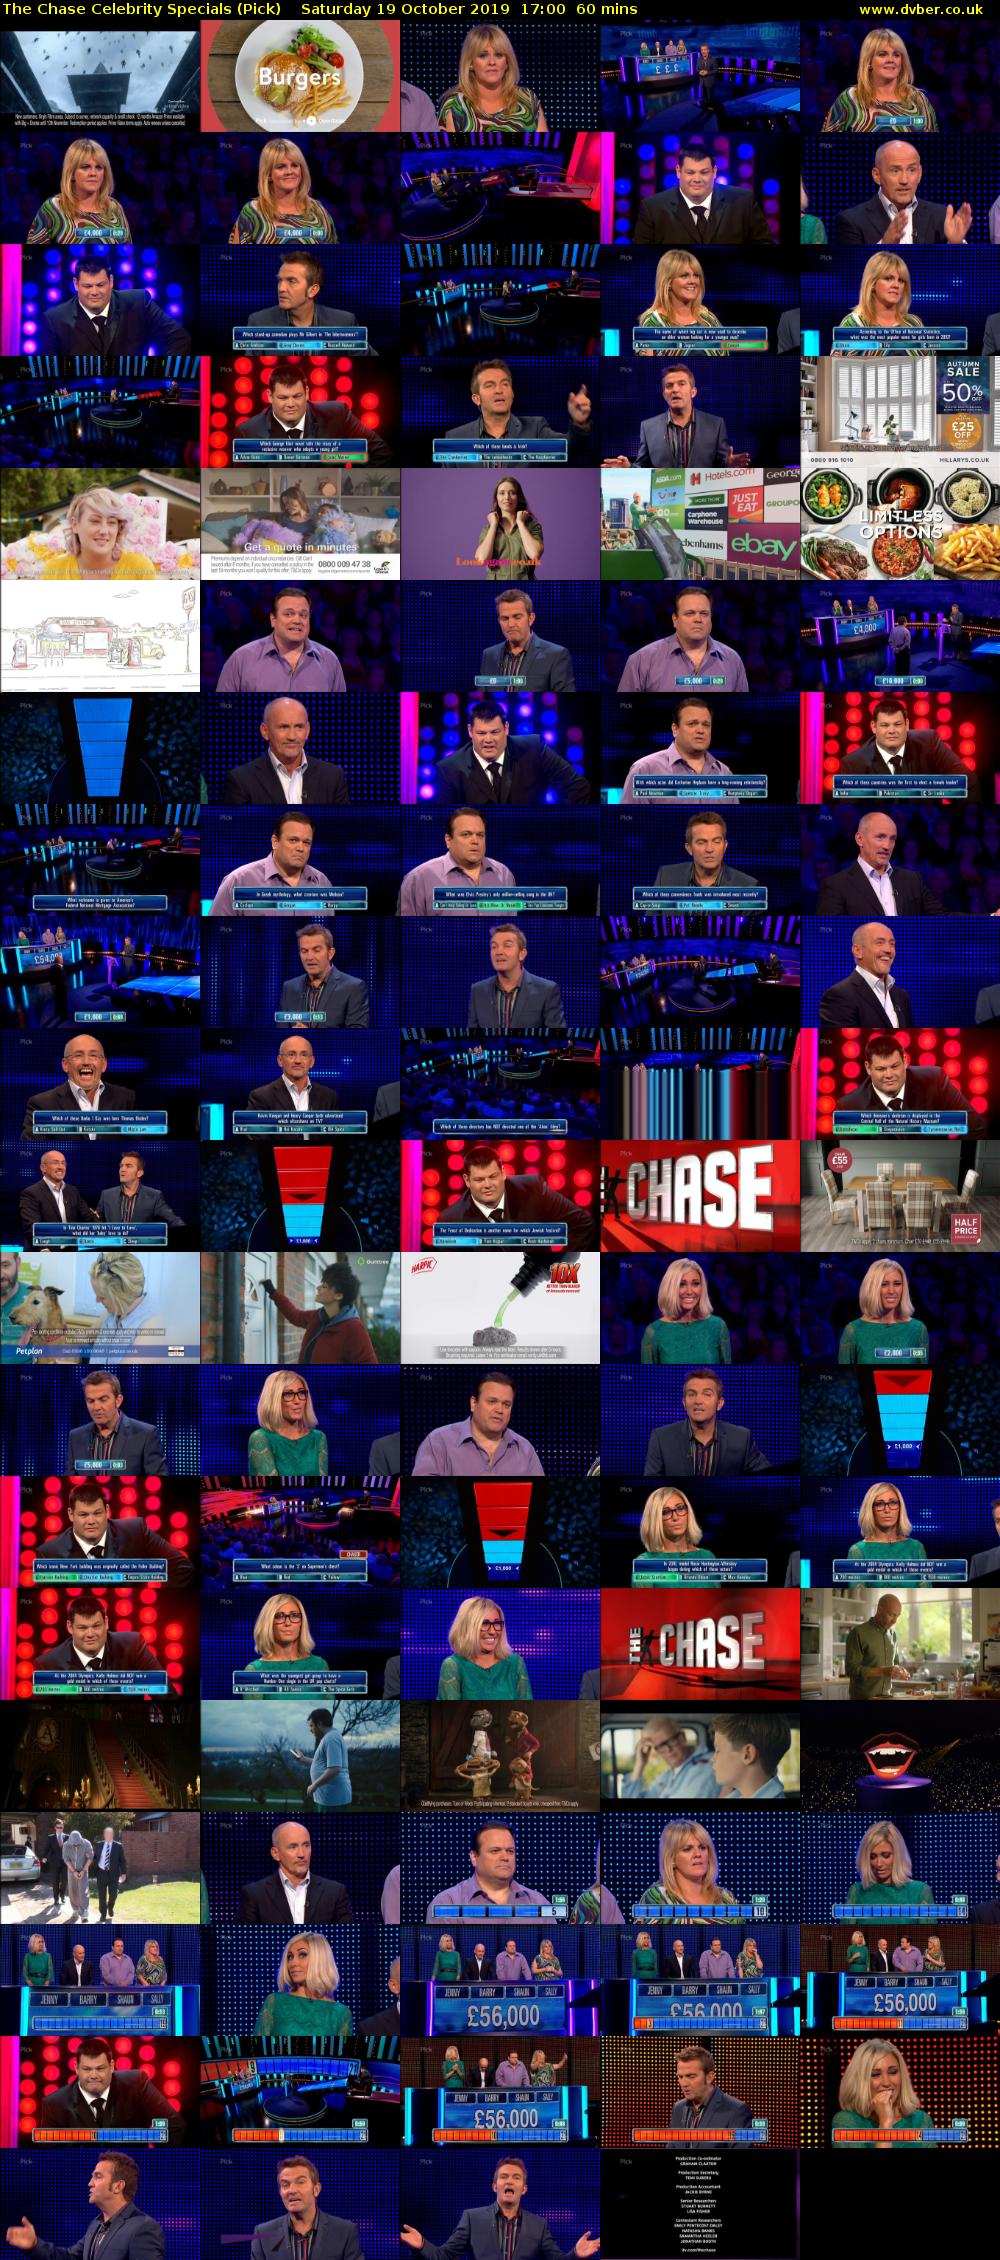 The Chase Celebrity Specials (Pick) Saturday 19 October 2019 17:00 - 18:00